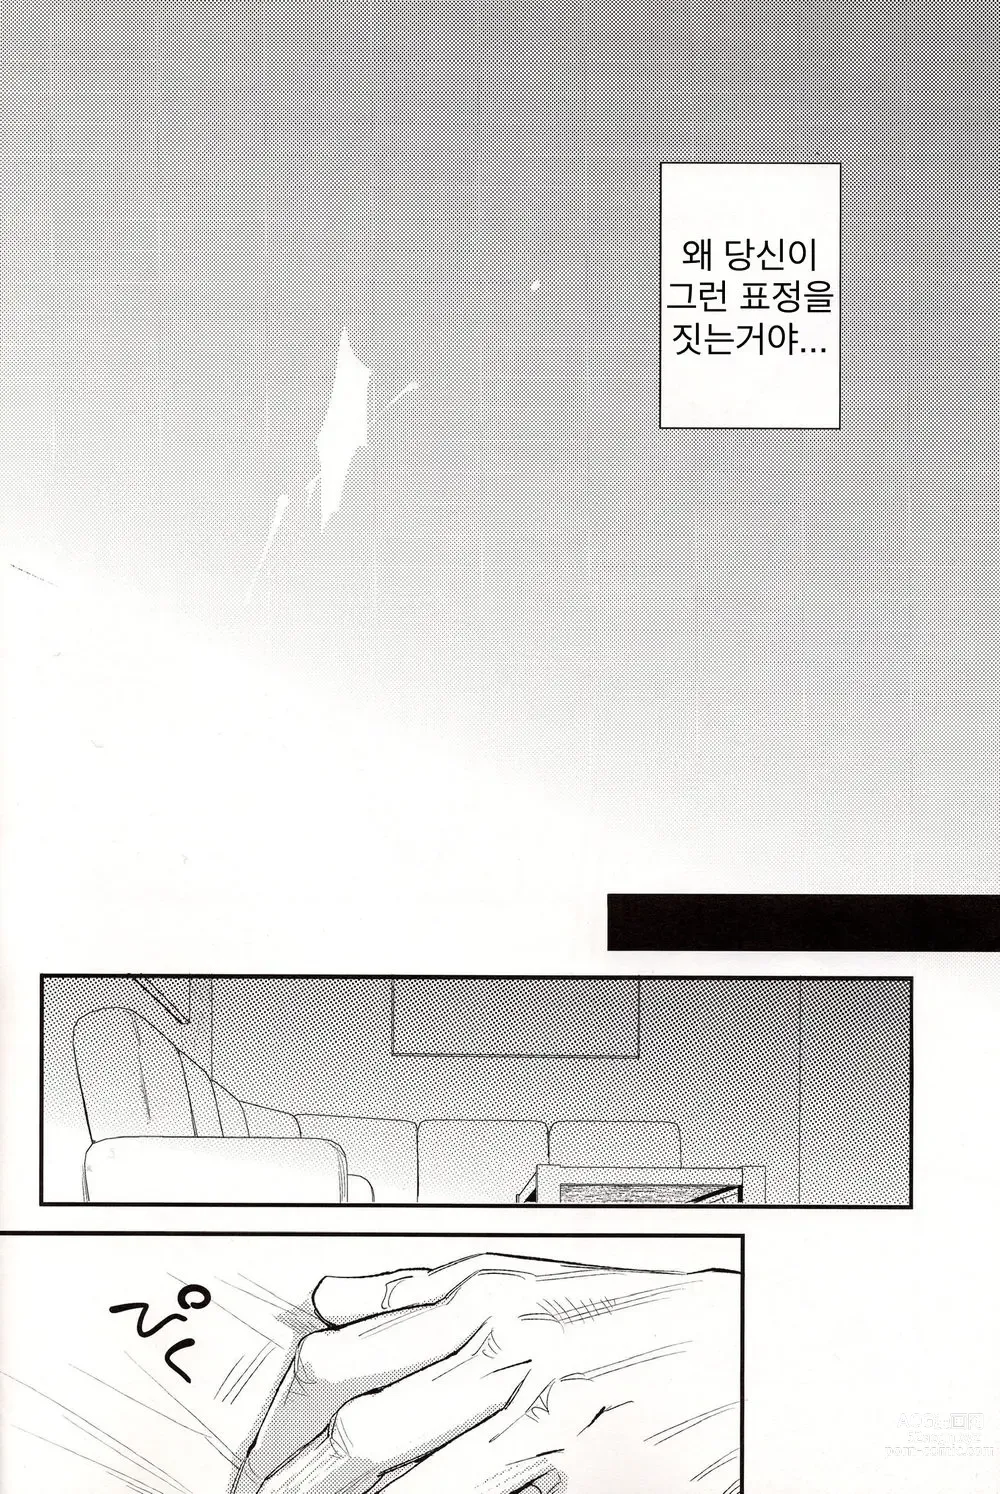 Page 10 of doujinshi Daydream - 백일몽